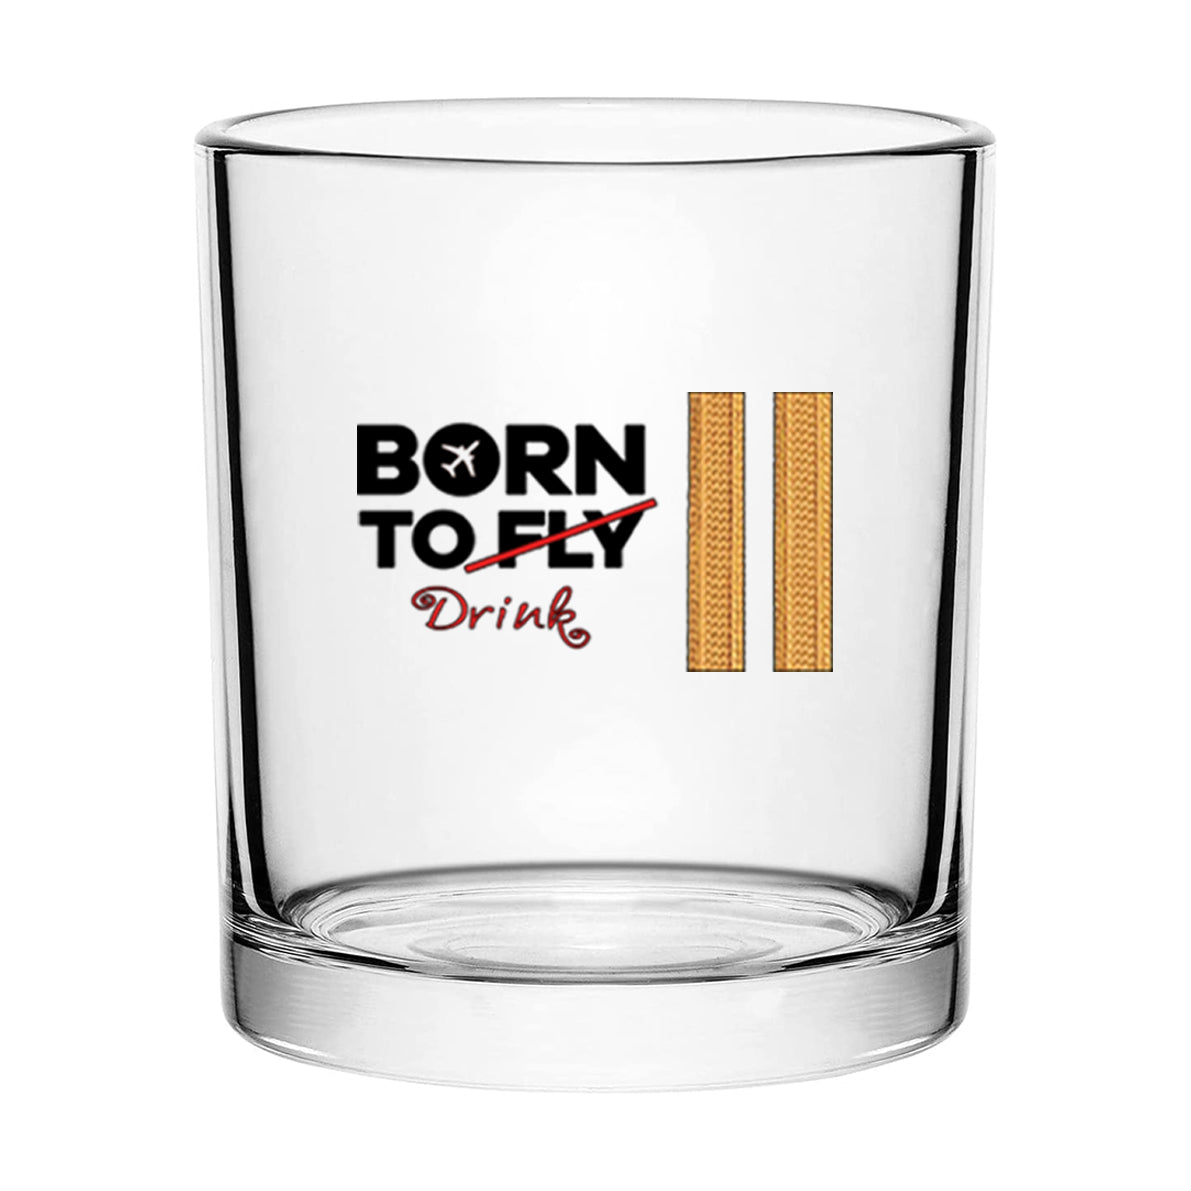 Born To Drink & 2 Lines Designed Special Whiskey Glasses